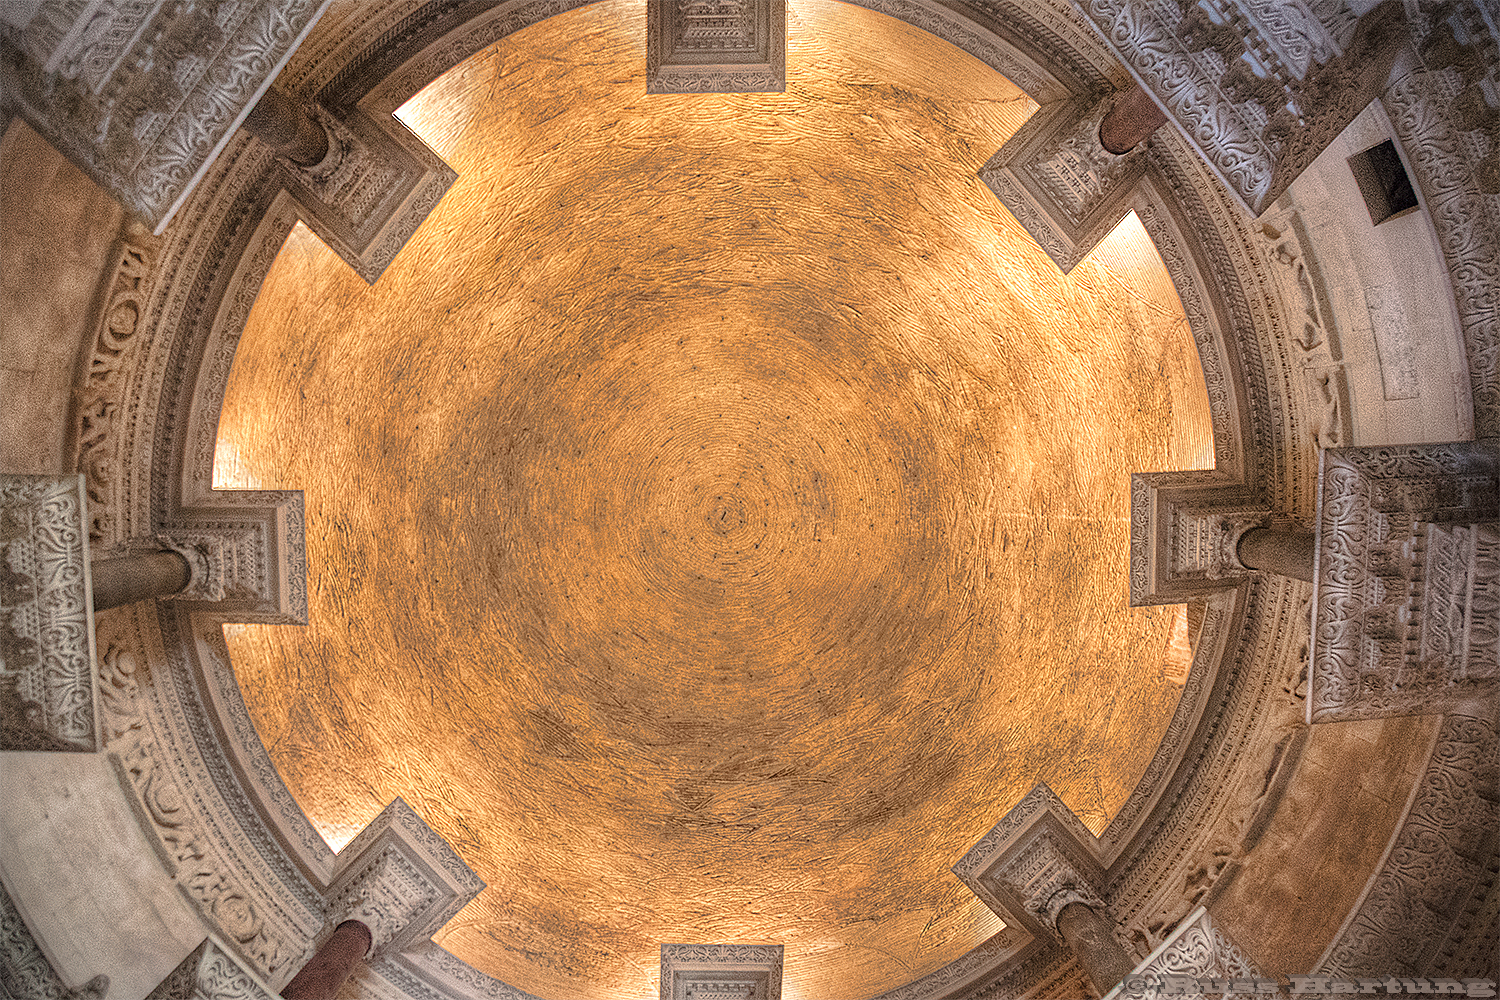 Mausoleum dome - Diocletian Palace - Split, Croatia. Built ~ 300 AD by Emperor Diocletian (who killed many early Christians). After he died a Christian cathedral was built over his tomb. (Karma).   